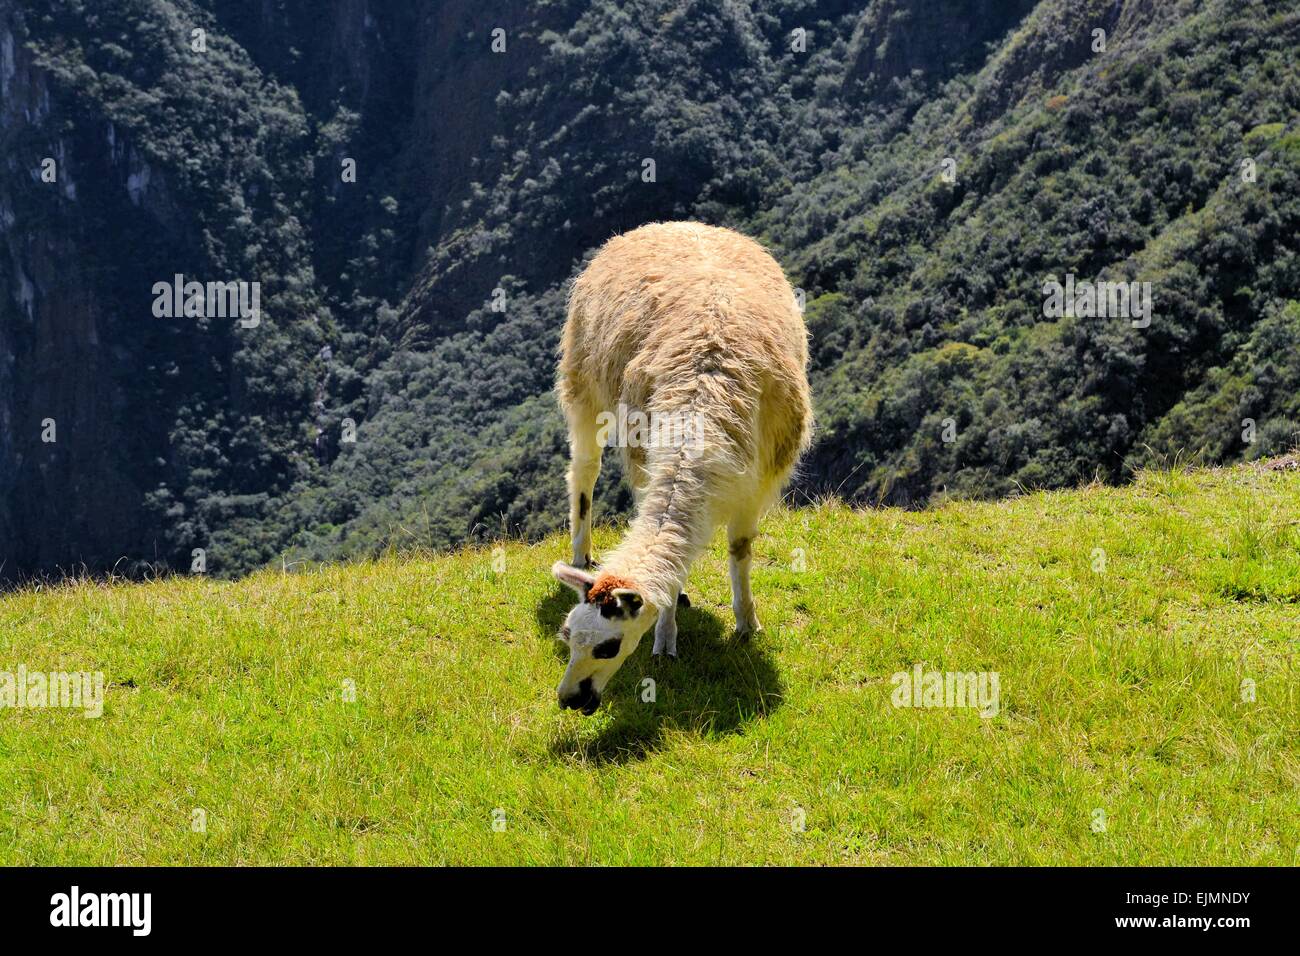 Llama in the Peruvian Andes mountains Stock Photo